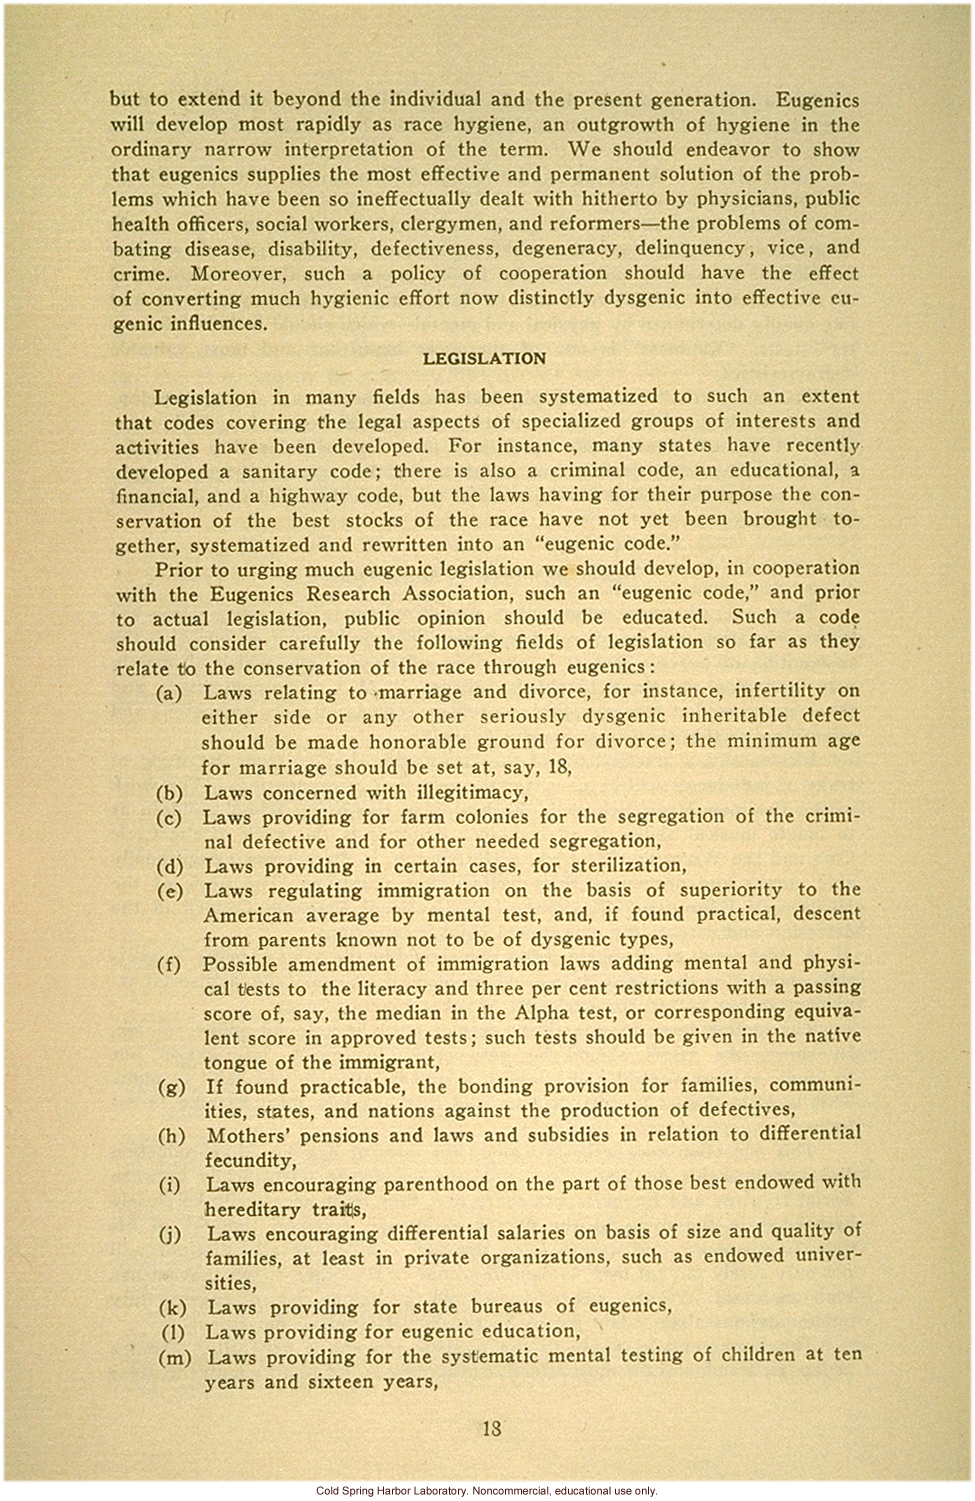 &quote;Report of the president of the American Eugenics Society, Inc., June 26, 1926&quote;